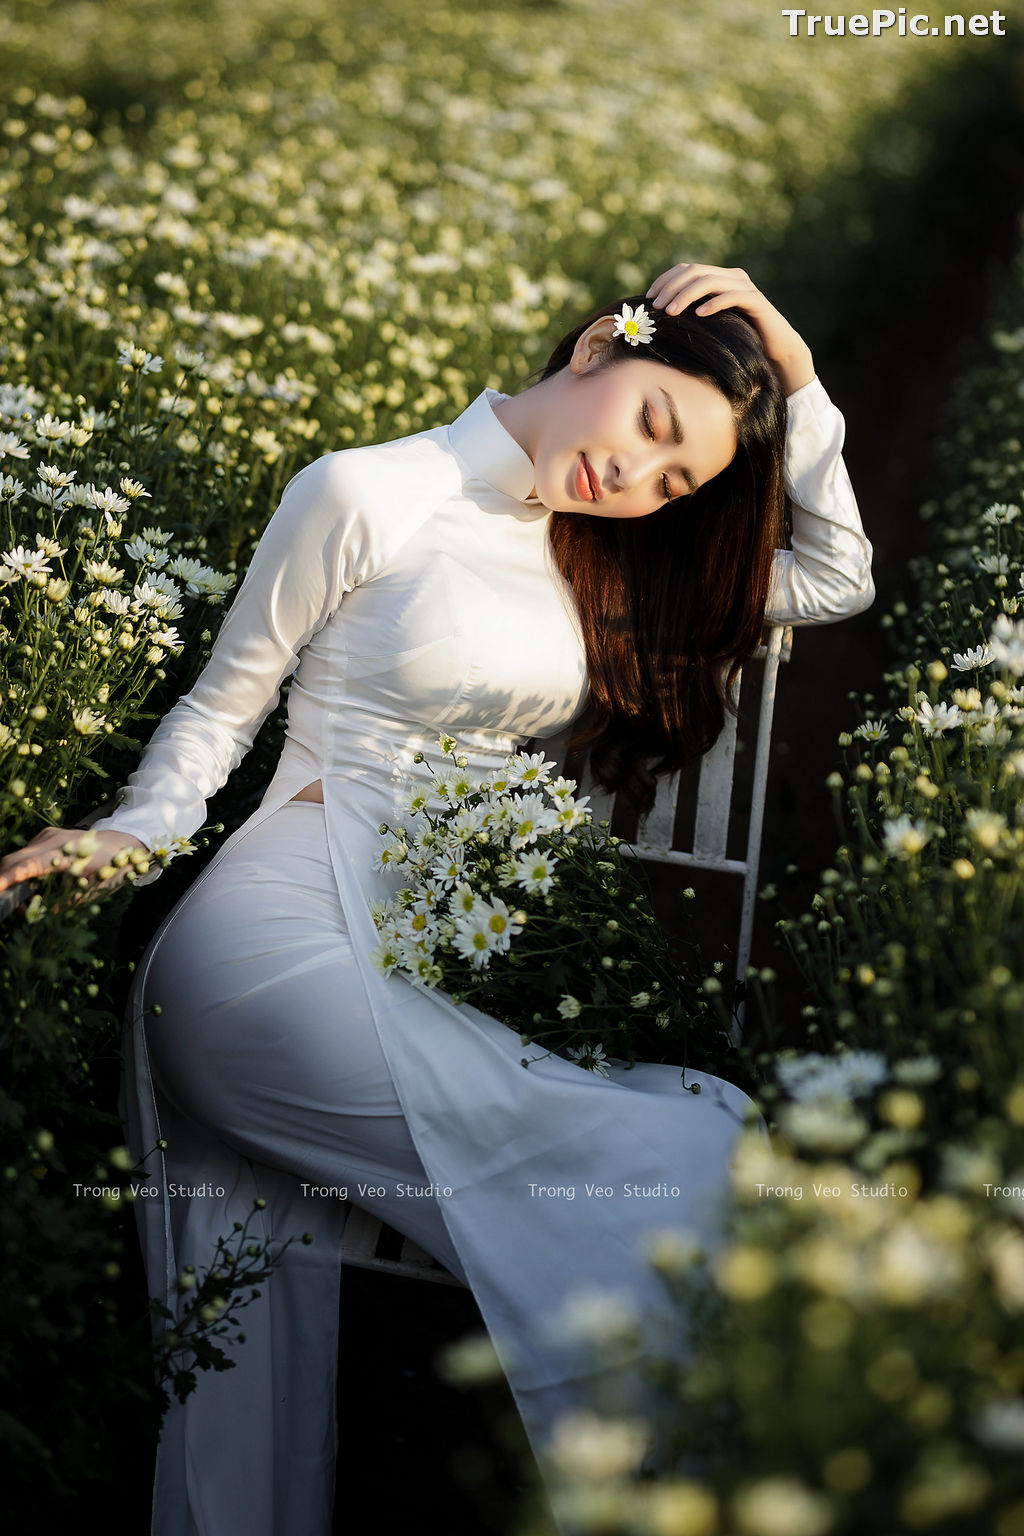 Image The Beauty of Vietnamese Girls with Traditional Dress (Ao Dai) #5 - TruePic.net - Picture-14